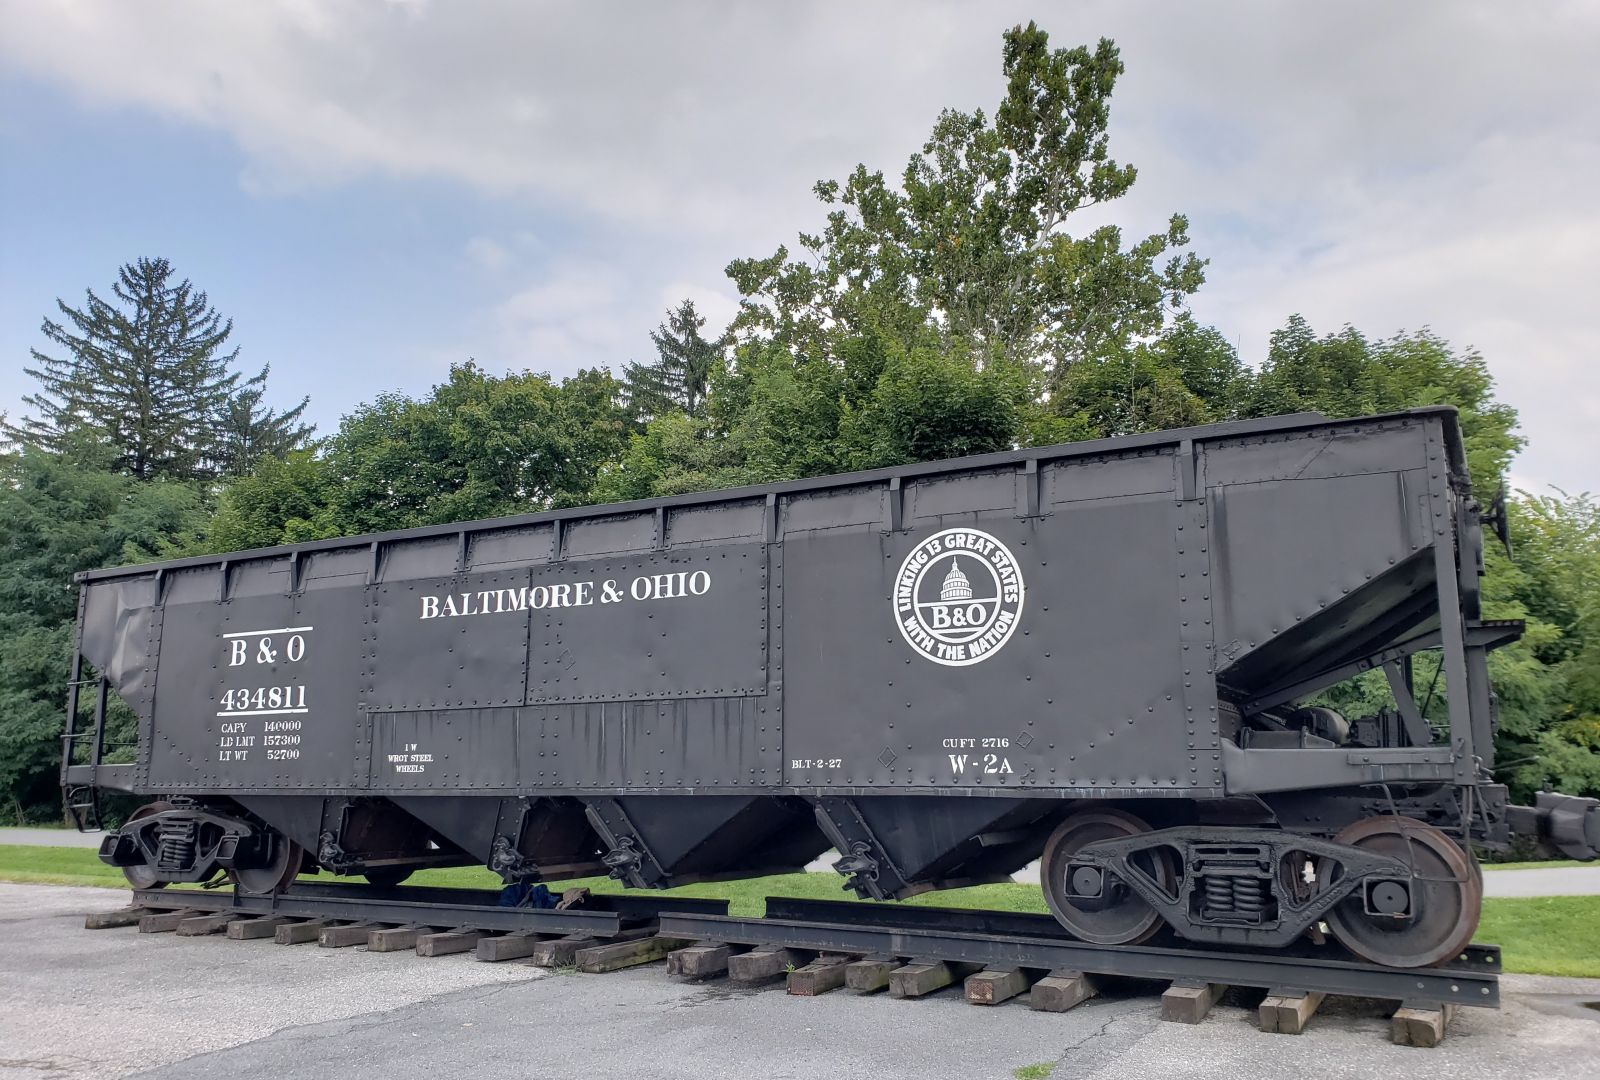 Pictured above: B&O railroad hopper car located at the Countys Hood Street Parking Lot.